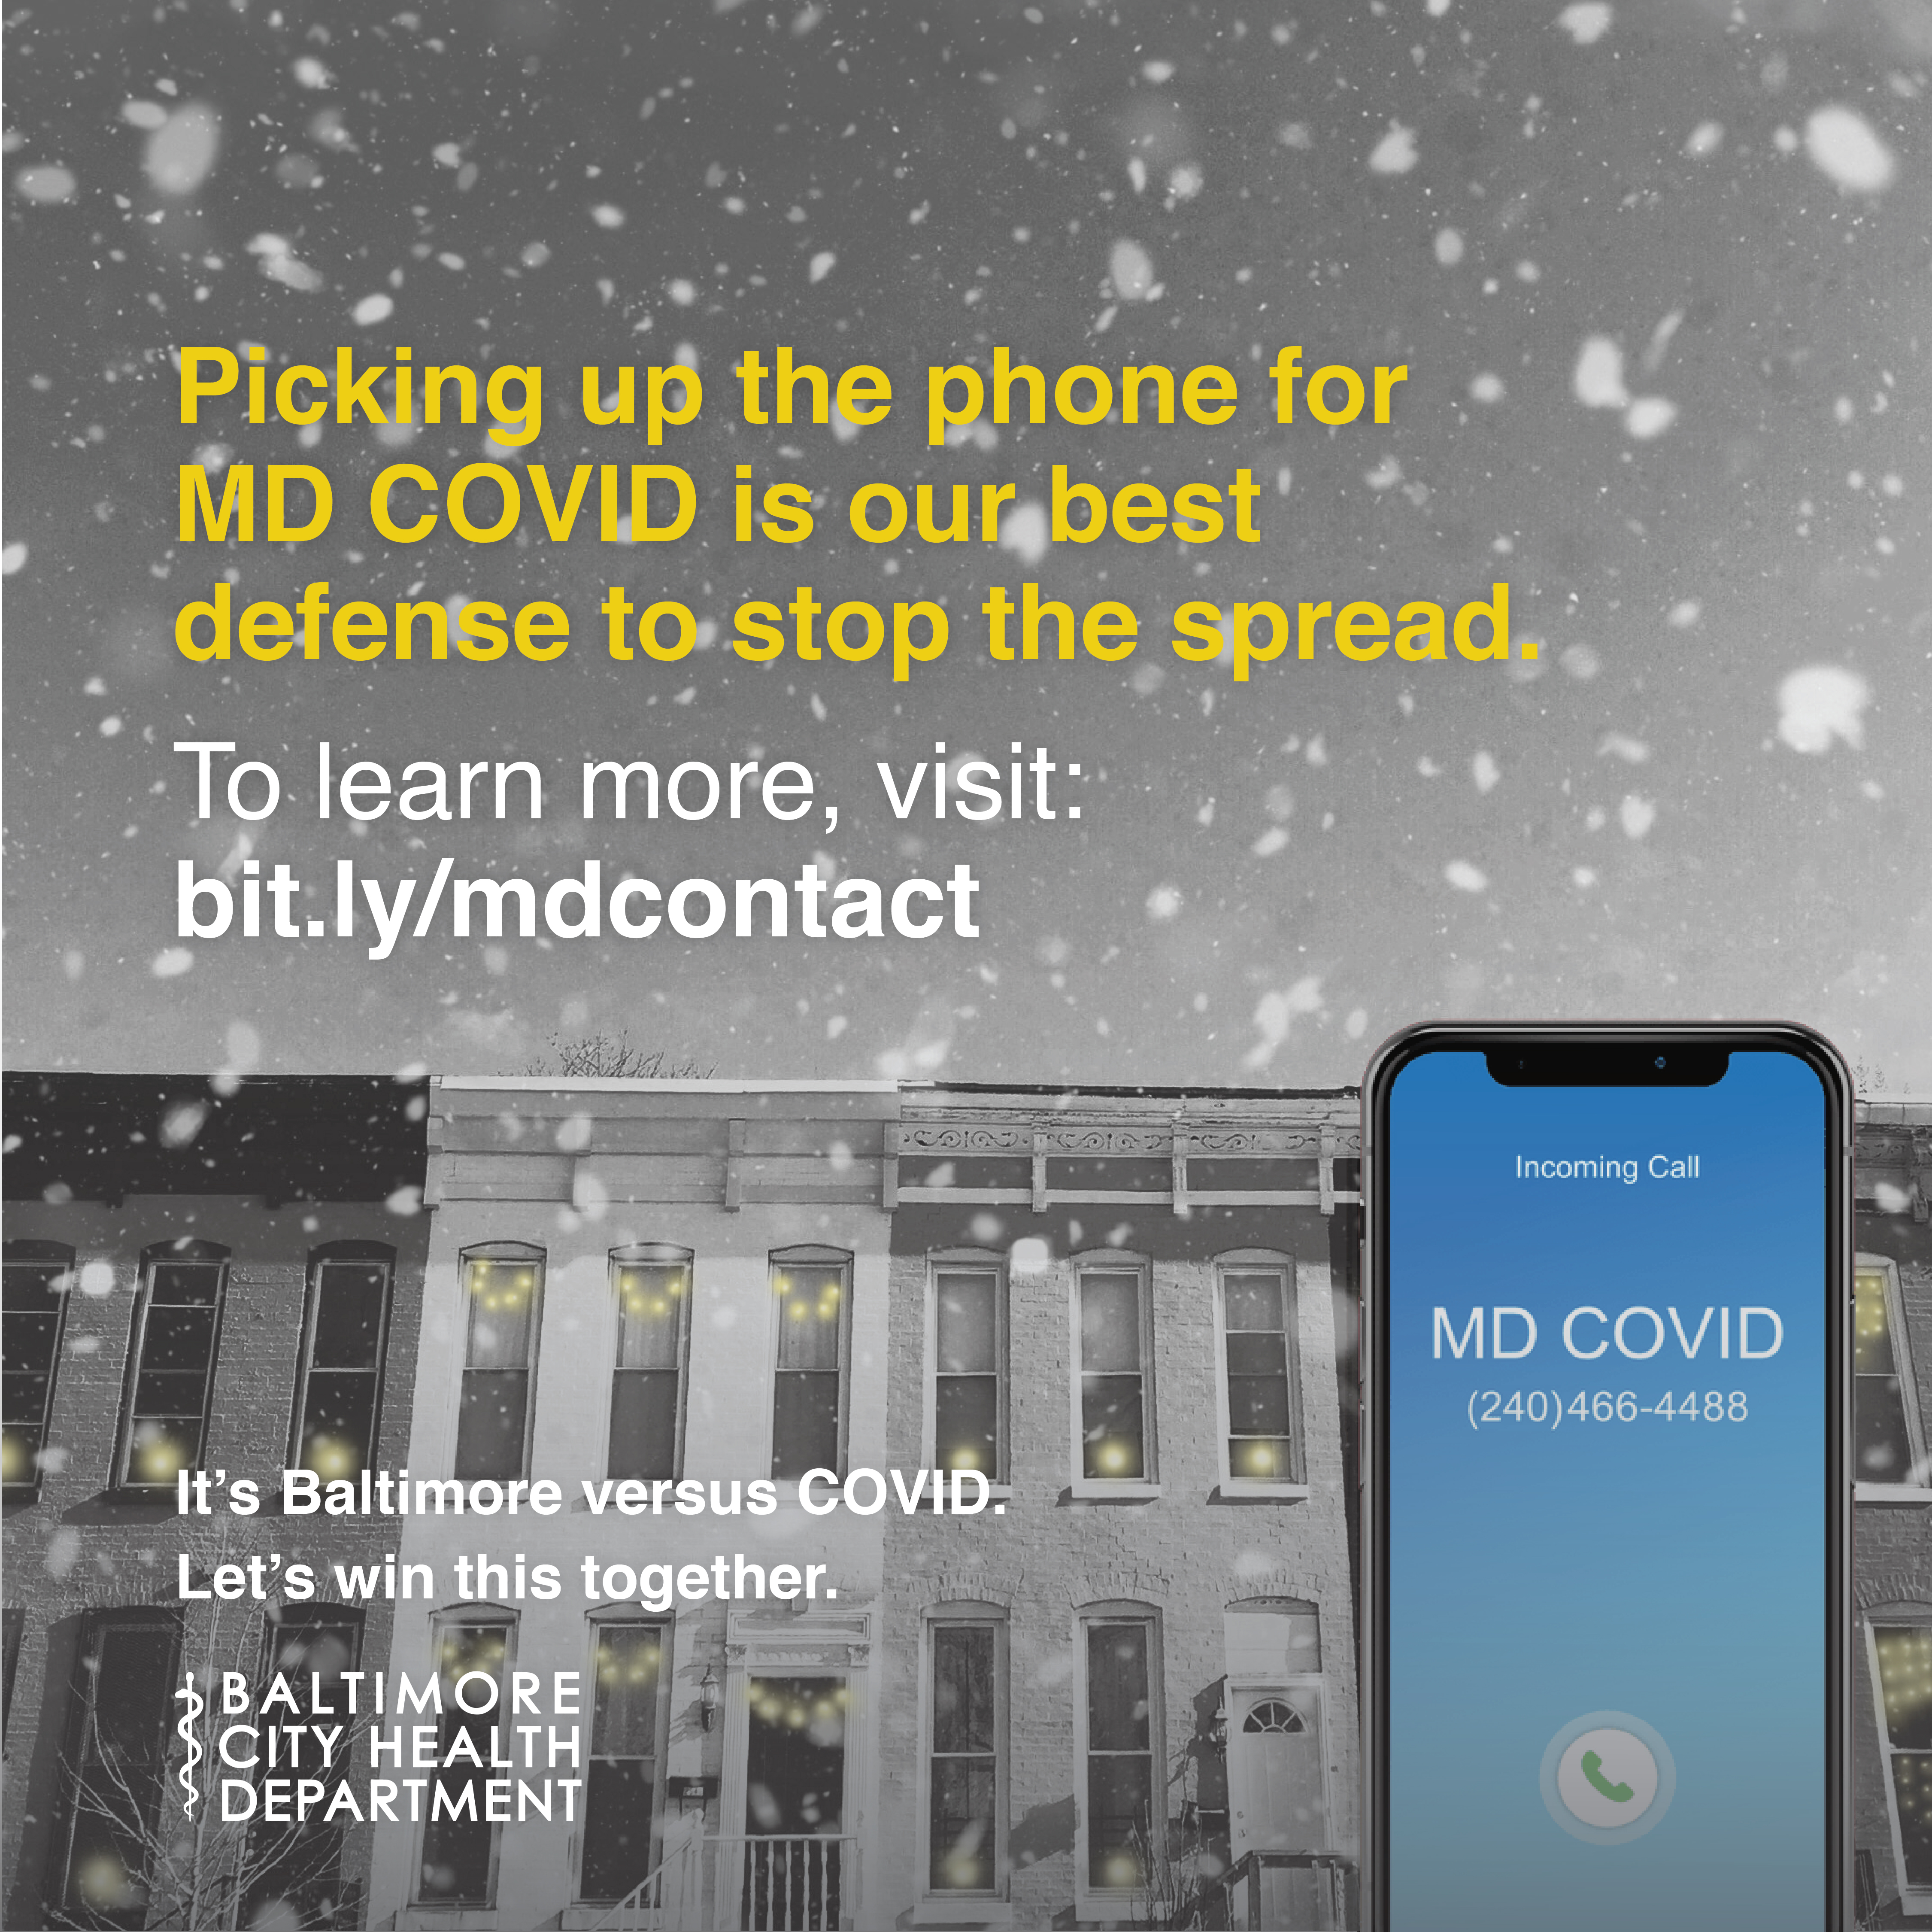 A Black and white photo of rowhomes with snow falling. In front , a cell phone with MD COVID calling. Text reads: Picking up the phone for MD COVID is our best defense to stop the spread. To learn more, visit bit.ly/mdcontact. Baltimore City Health Department